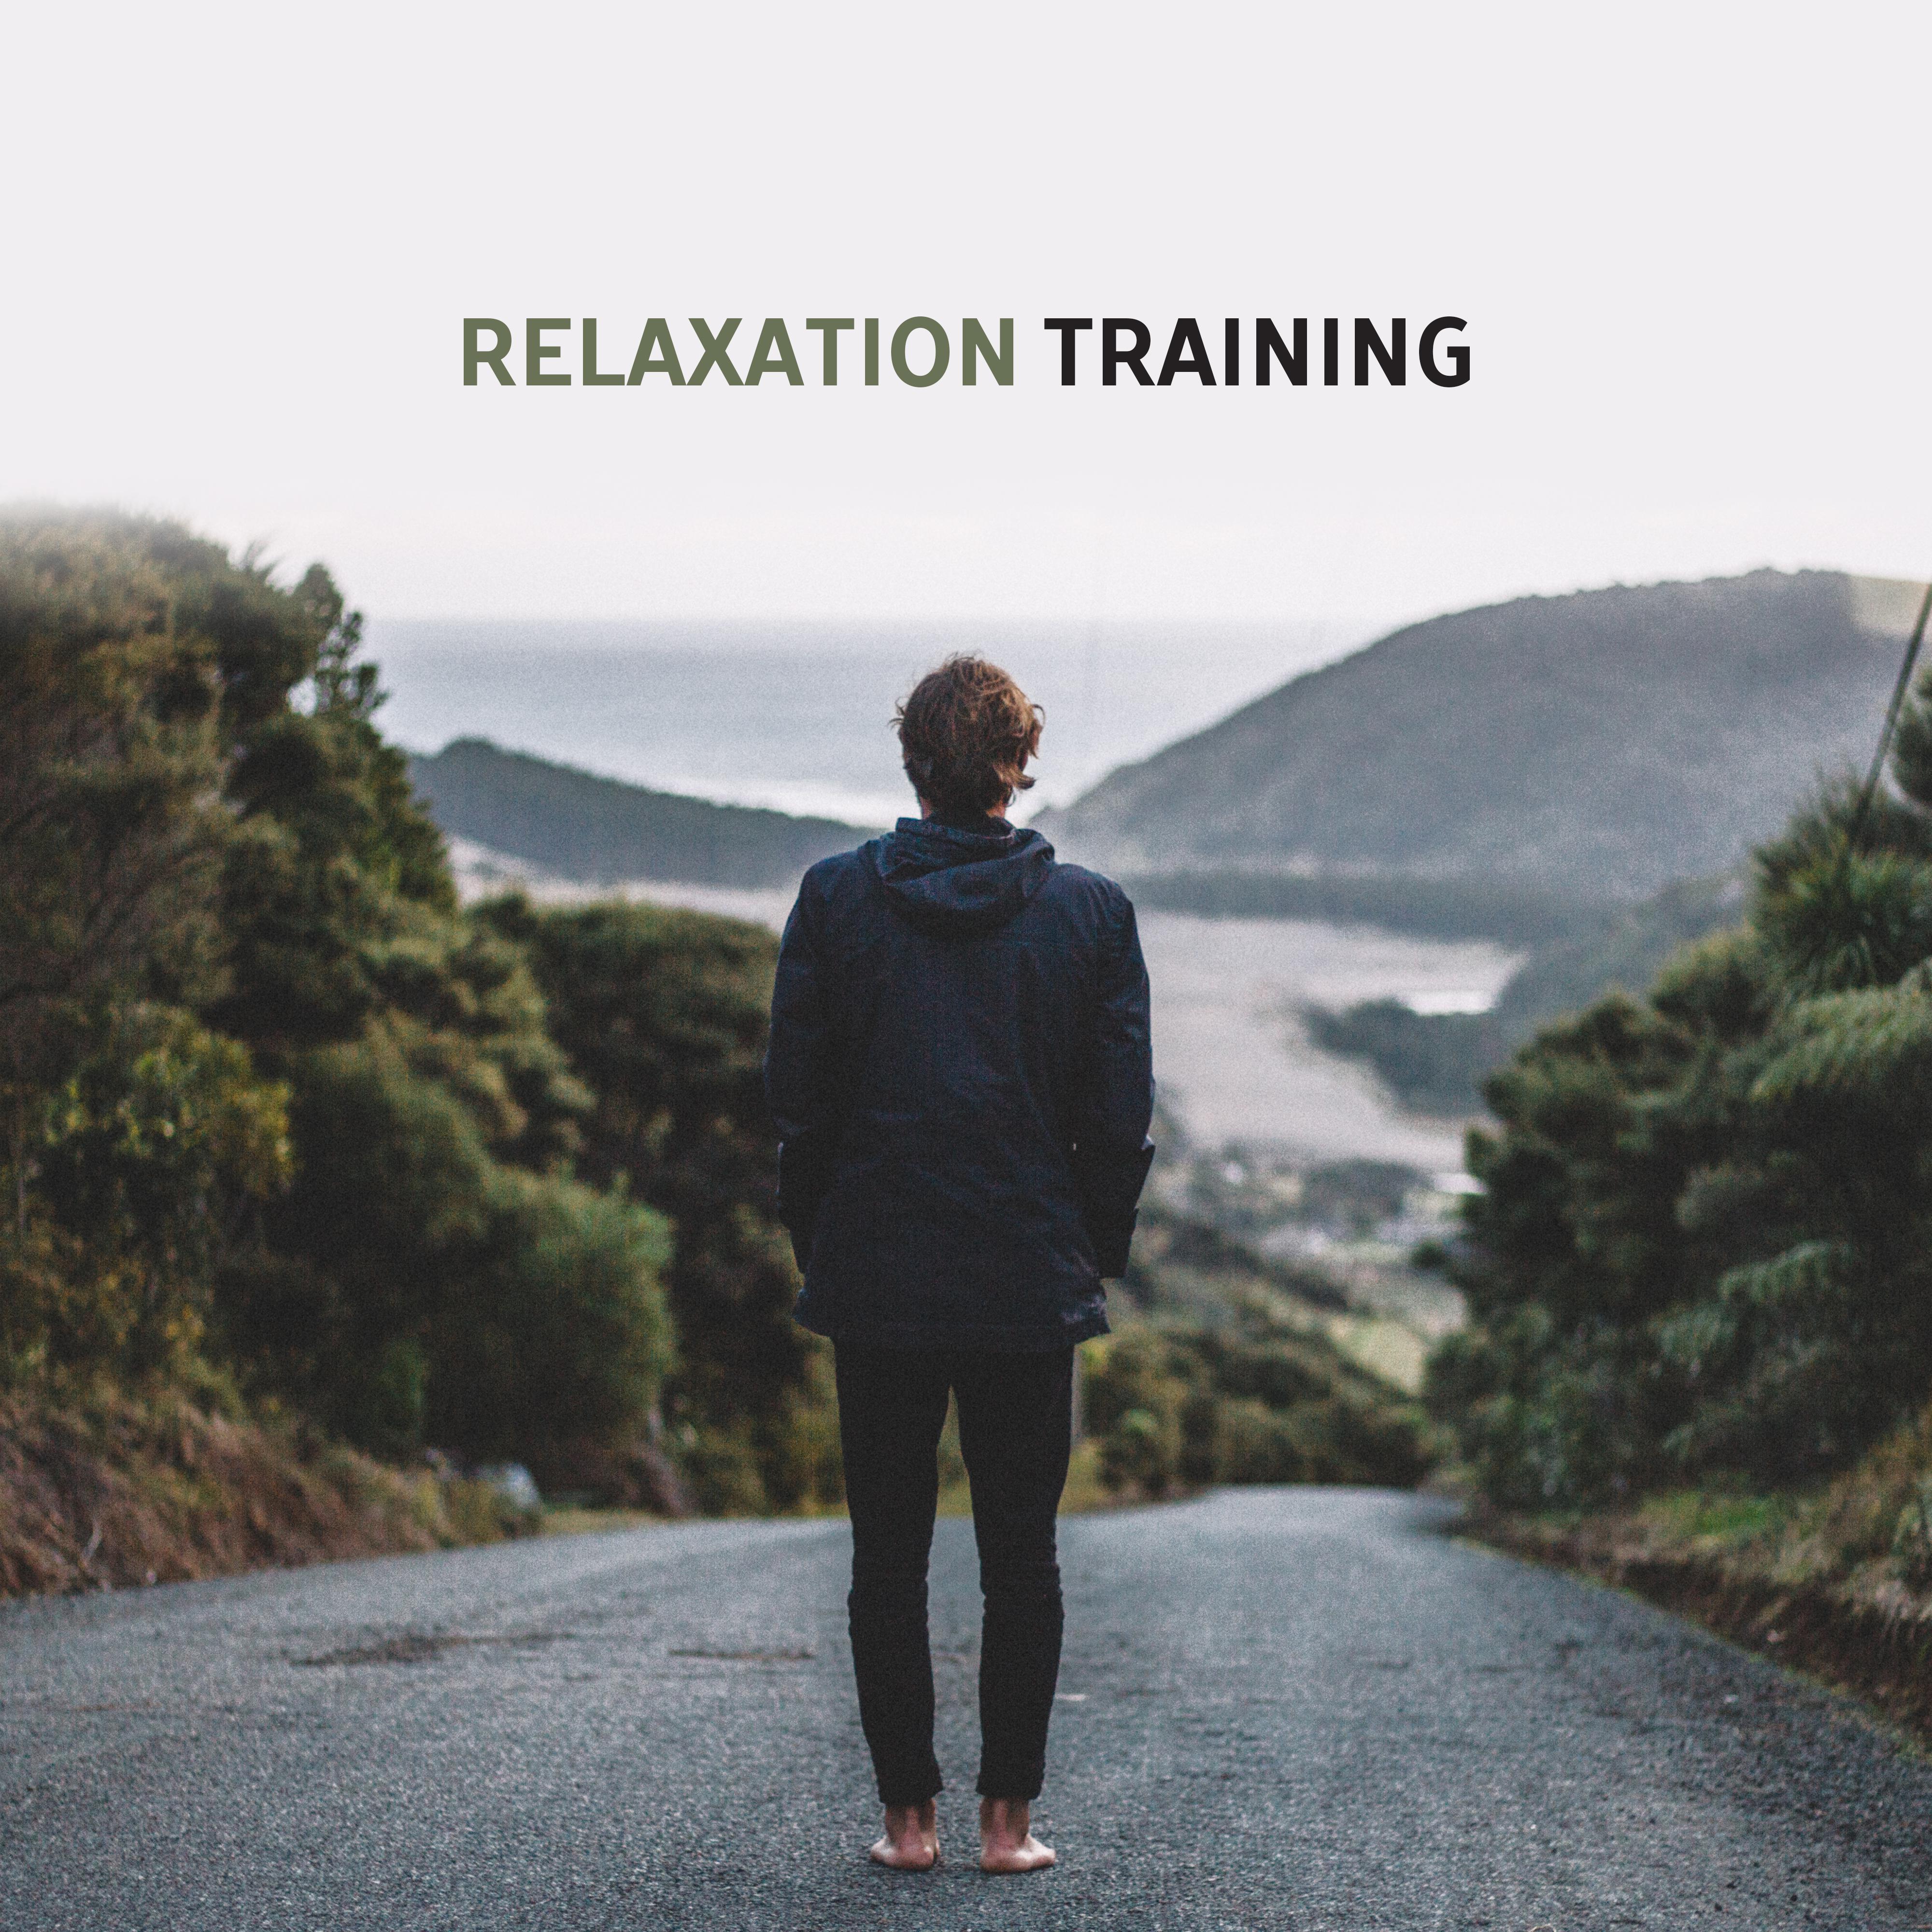 Relaxation Training – Calming New Age 2017 for Rest, Deep Relaxation, Manage Stress, Feel Better